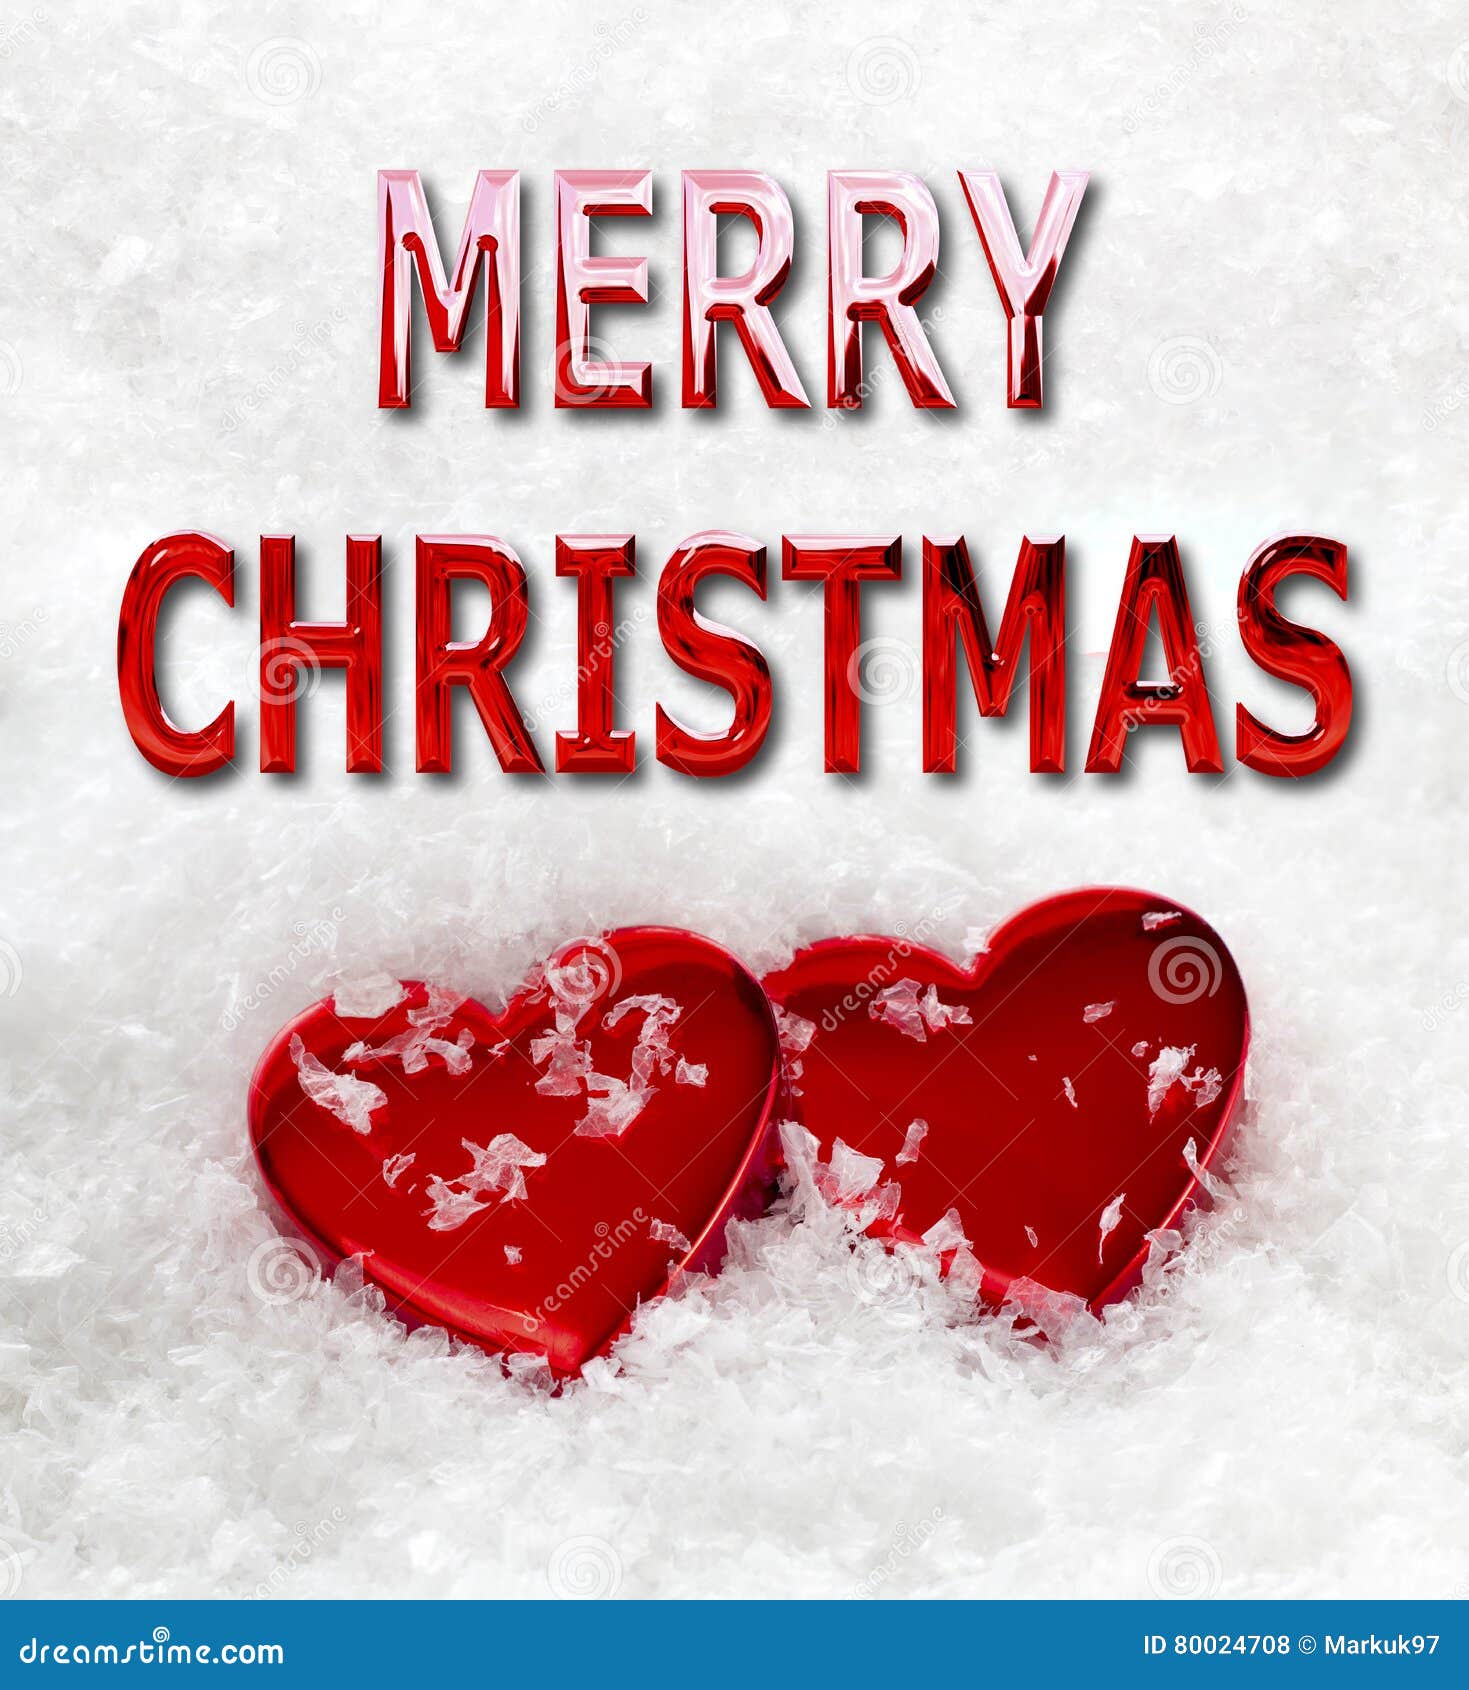 Merry Christmas Love Hearts In Snow Stock Photo - Image of bright, cold: 80024708